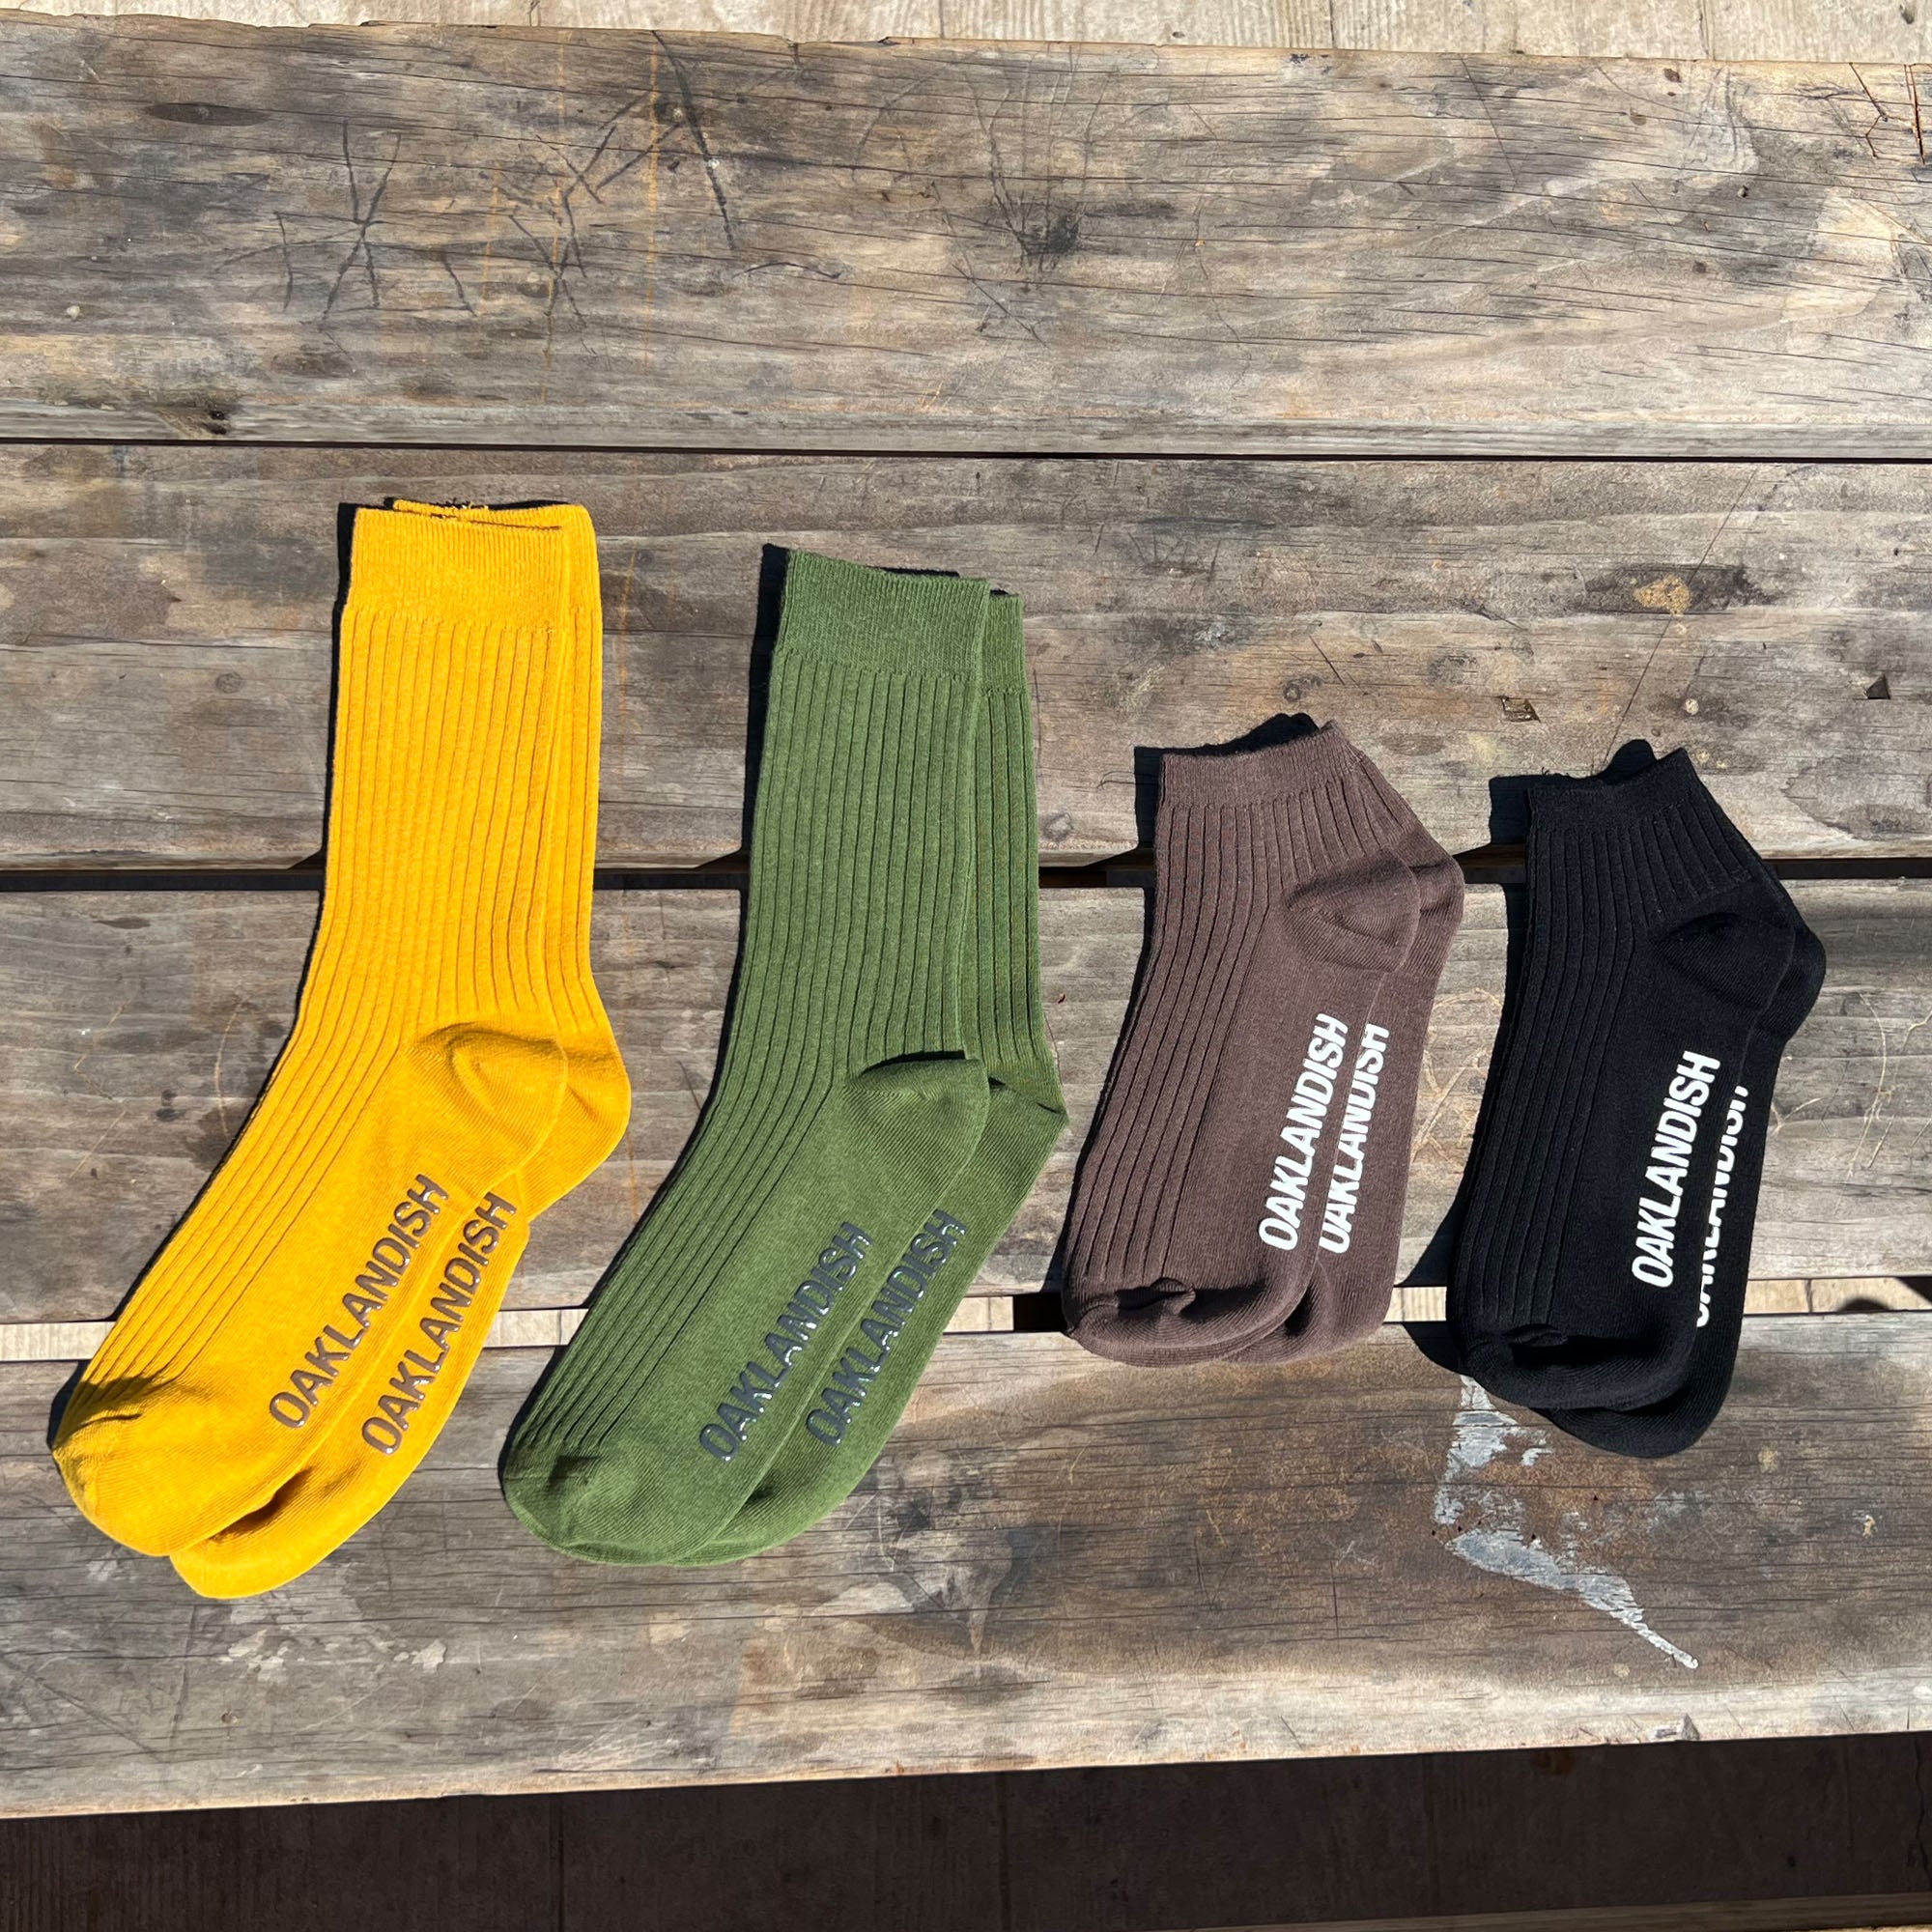 Men's Crew Socks in green, yellow, slate and black low grip sock included without packaging. Oaklandish text across sole. Socks positioned on wooden bench in natural light.